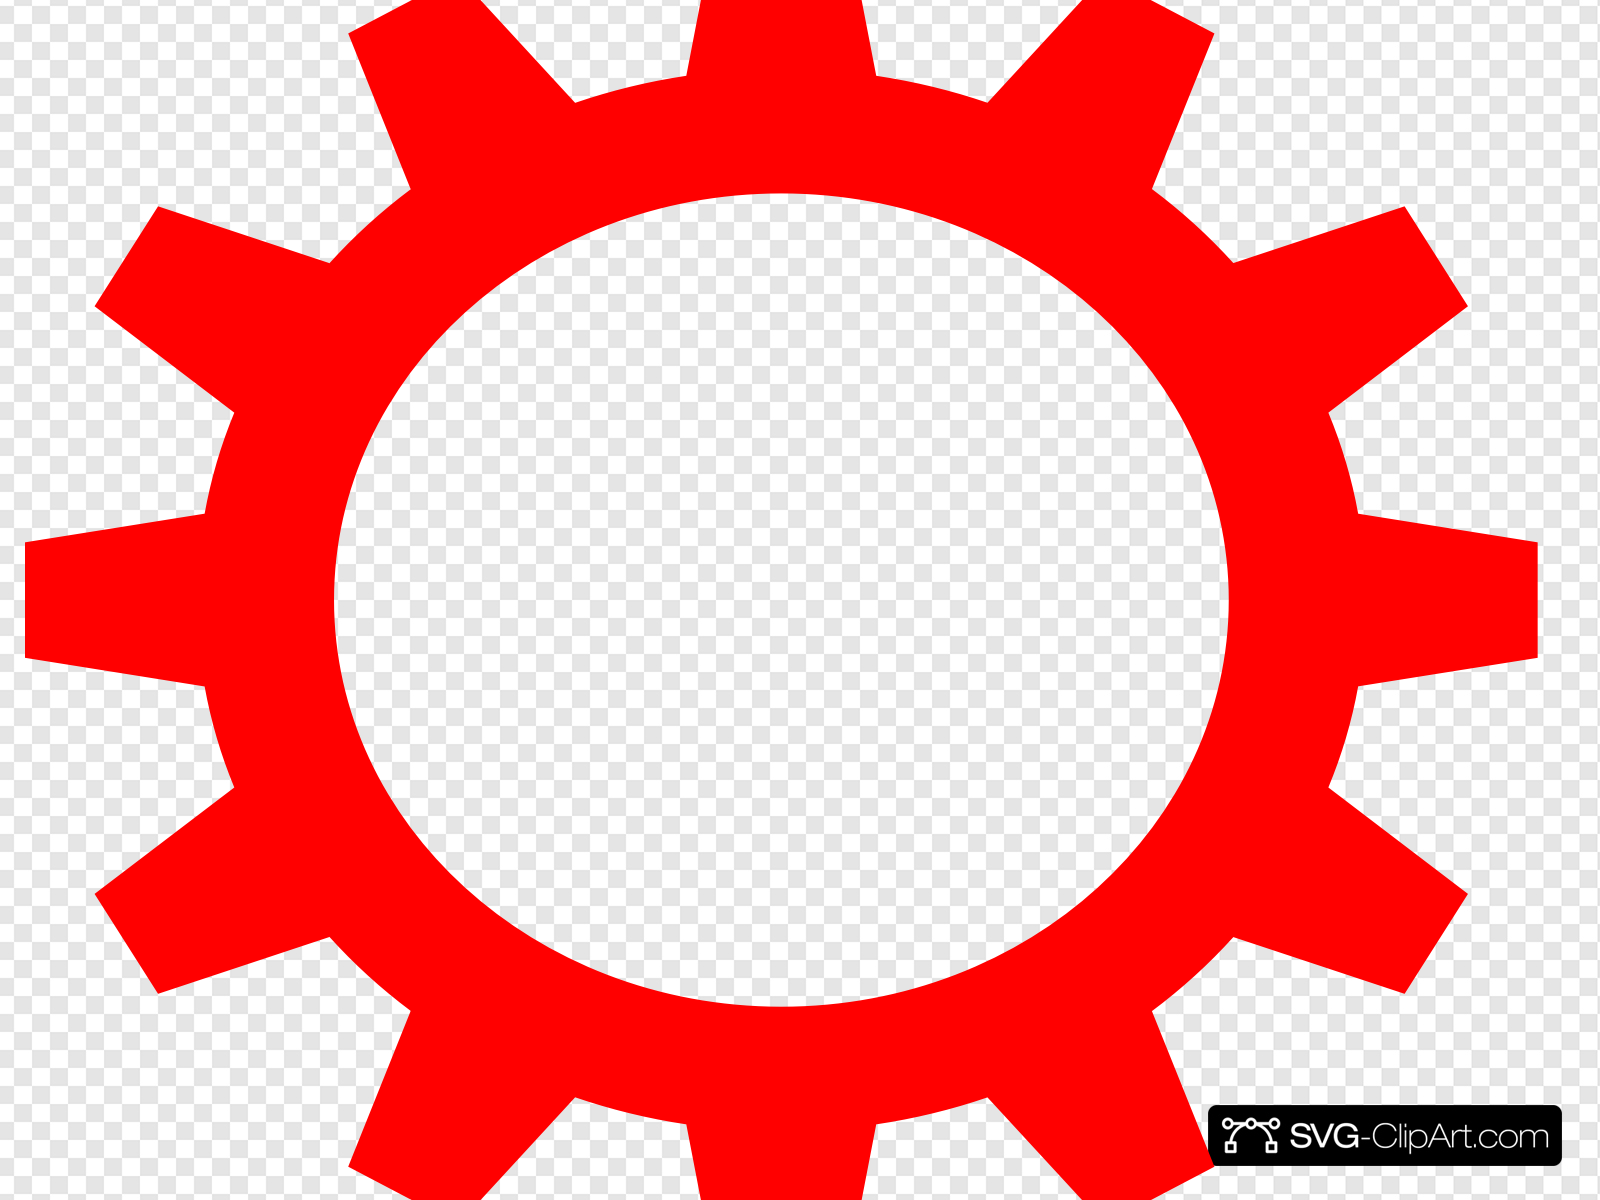 High Resolution Red Gear Clip art, Icon and SVG